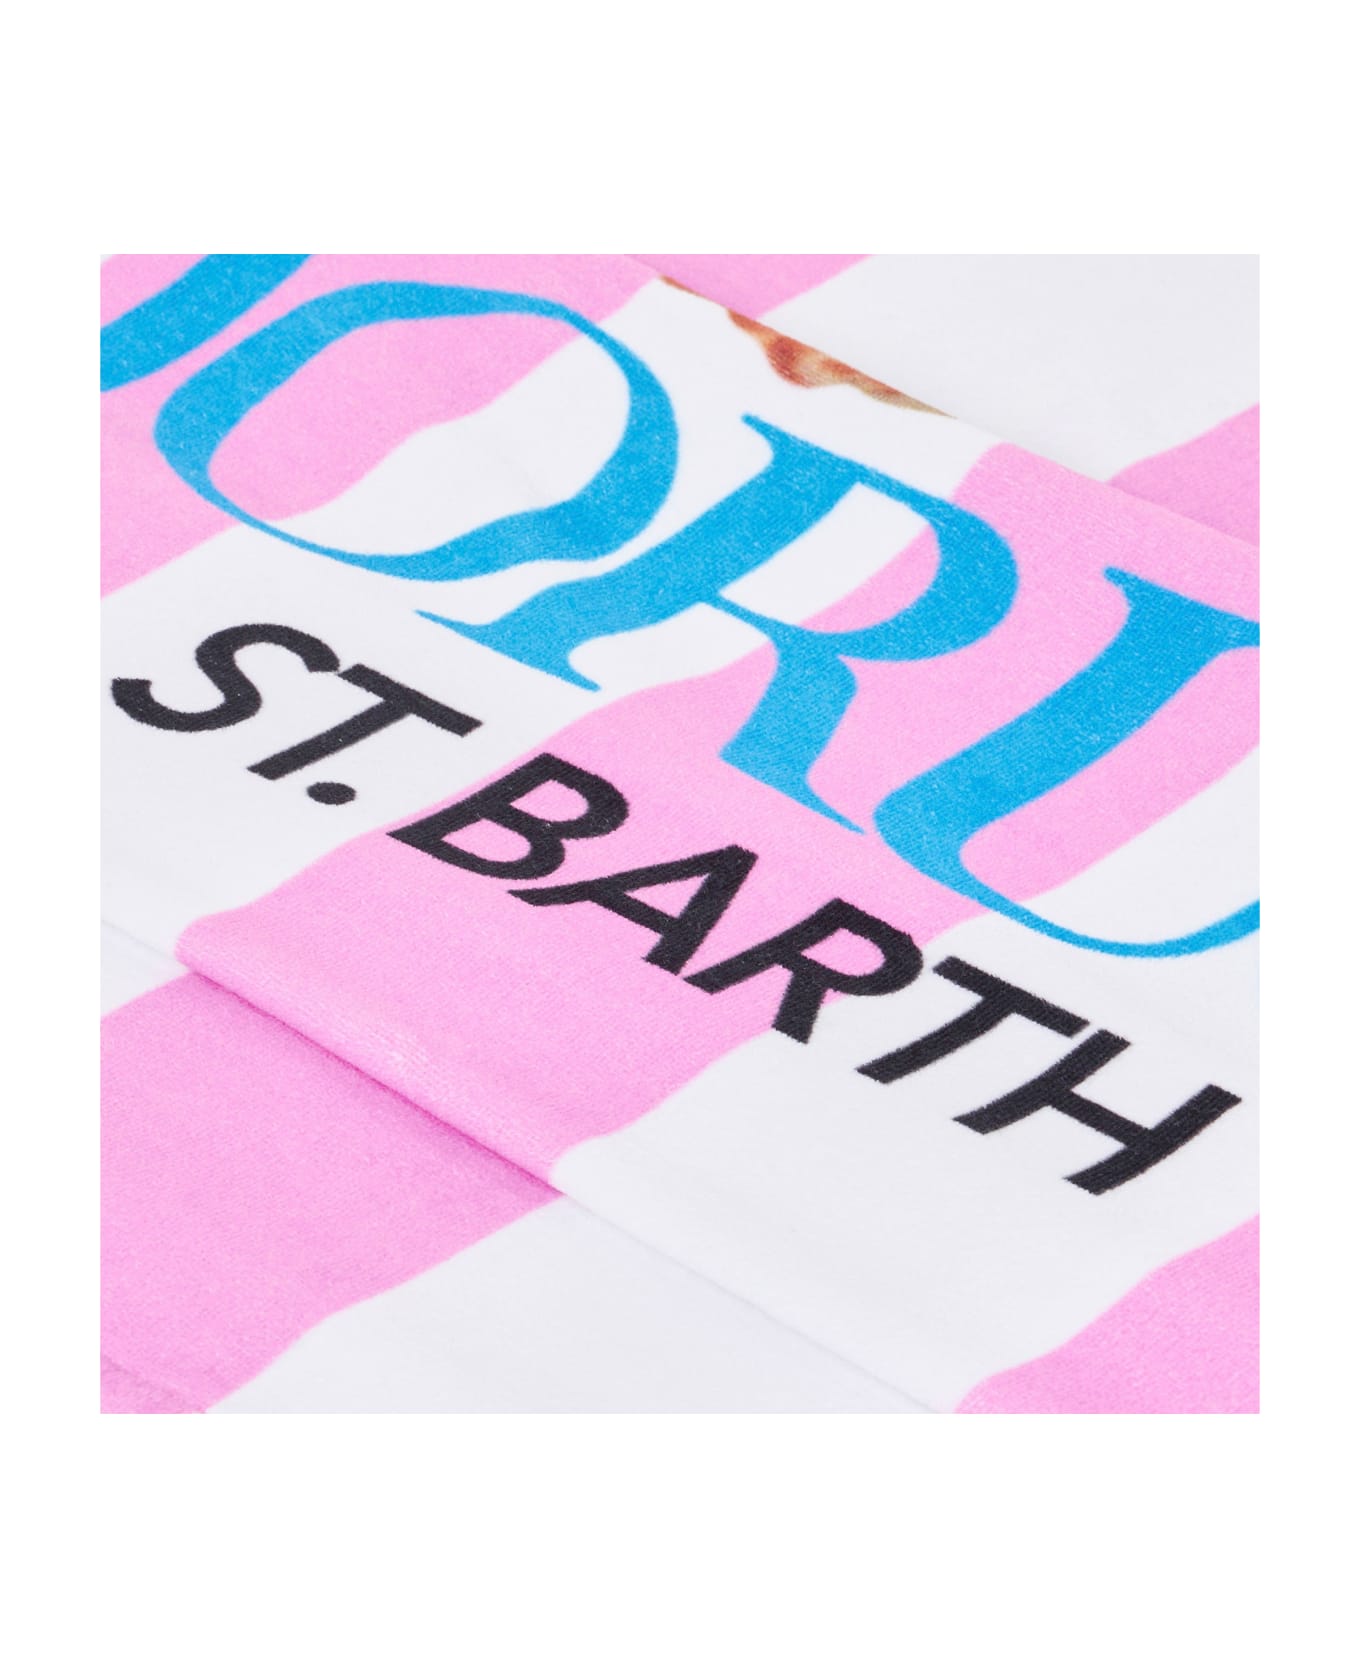 MC2 Saint Barth Soft Terry Beach Towel With Fiorucci Angels Print | Fiorucci Special Edition - PINK